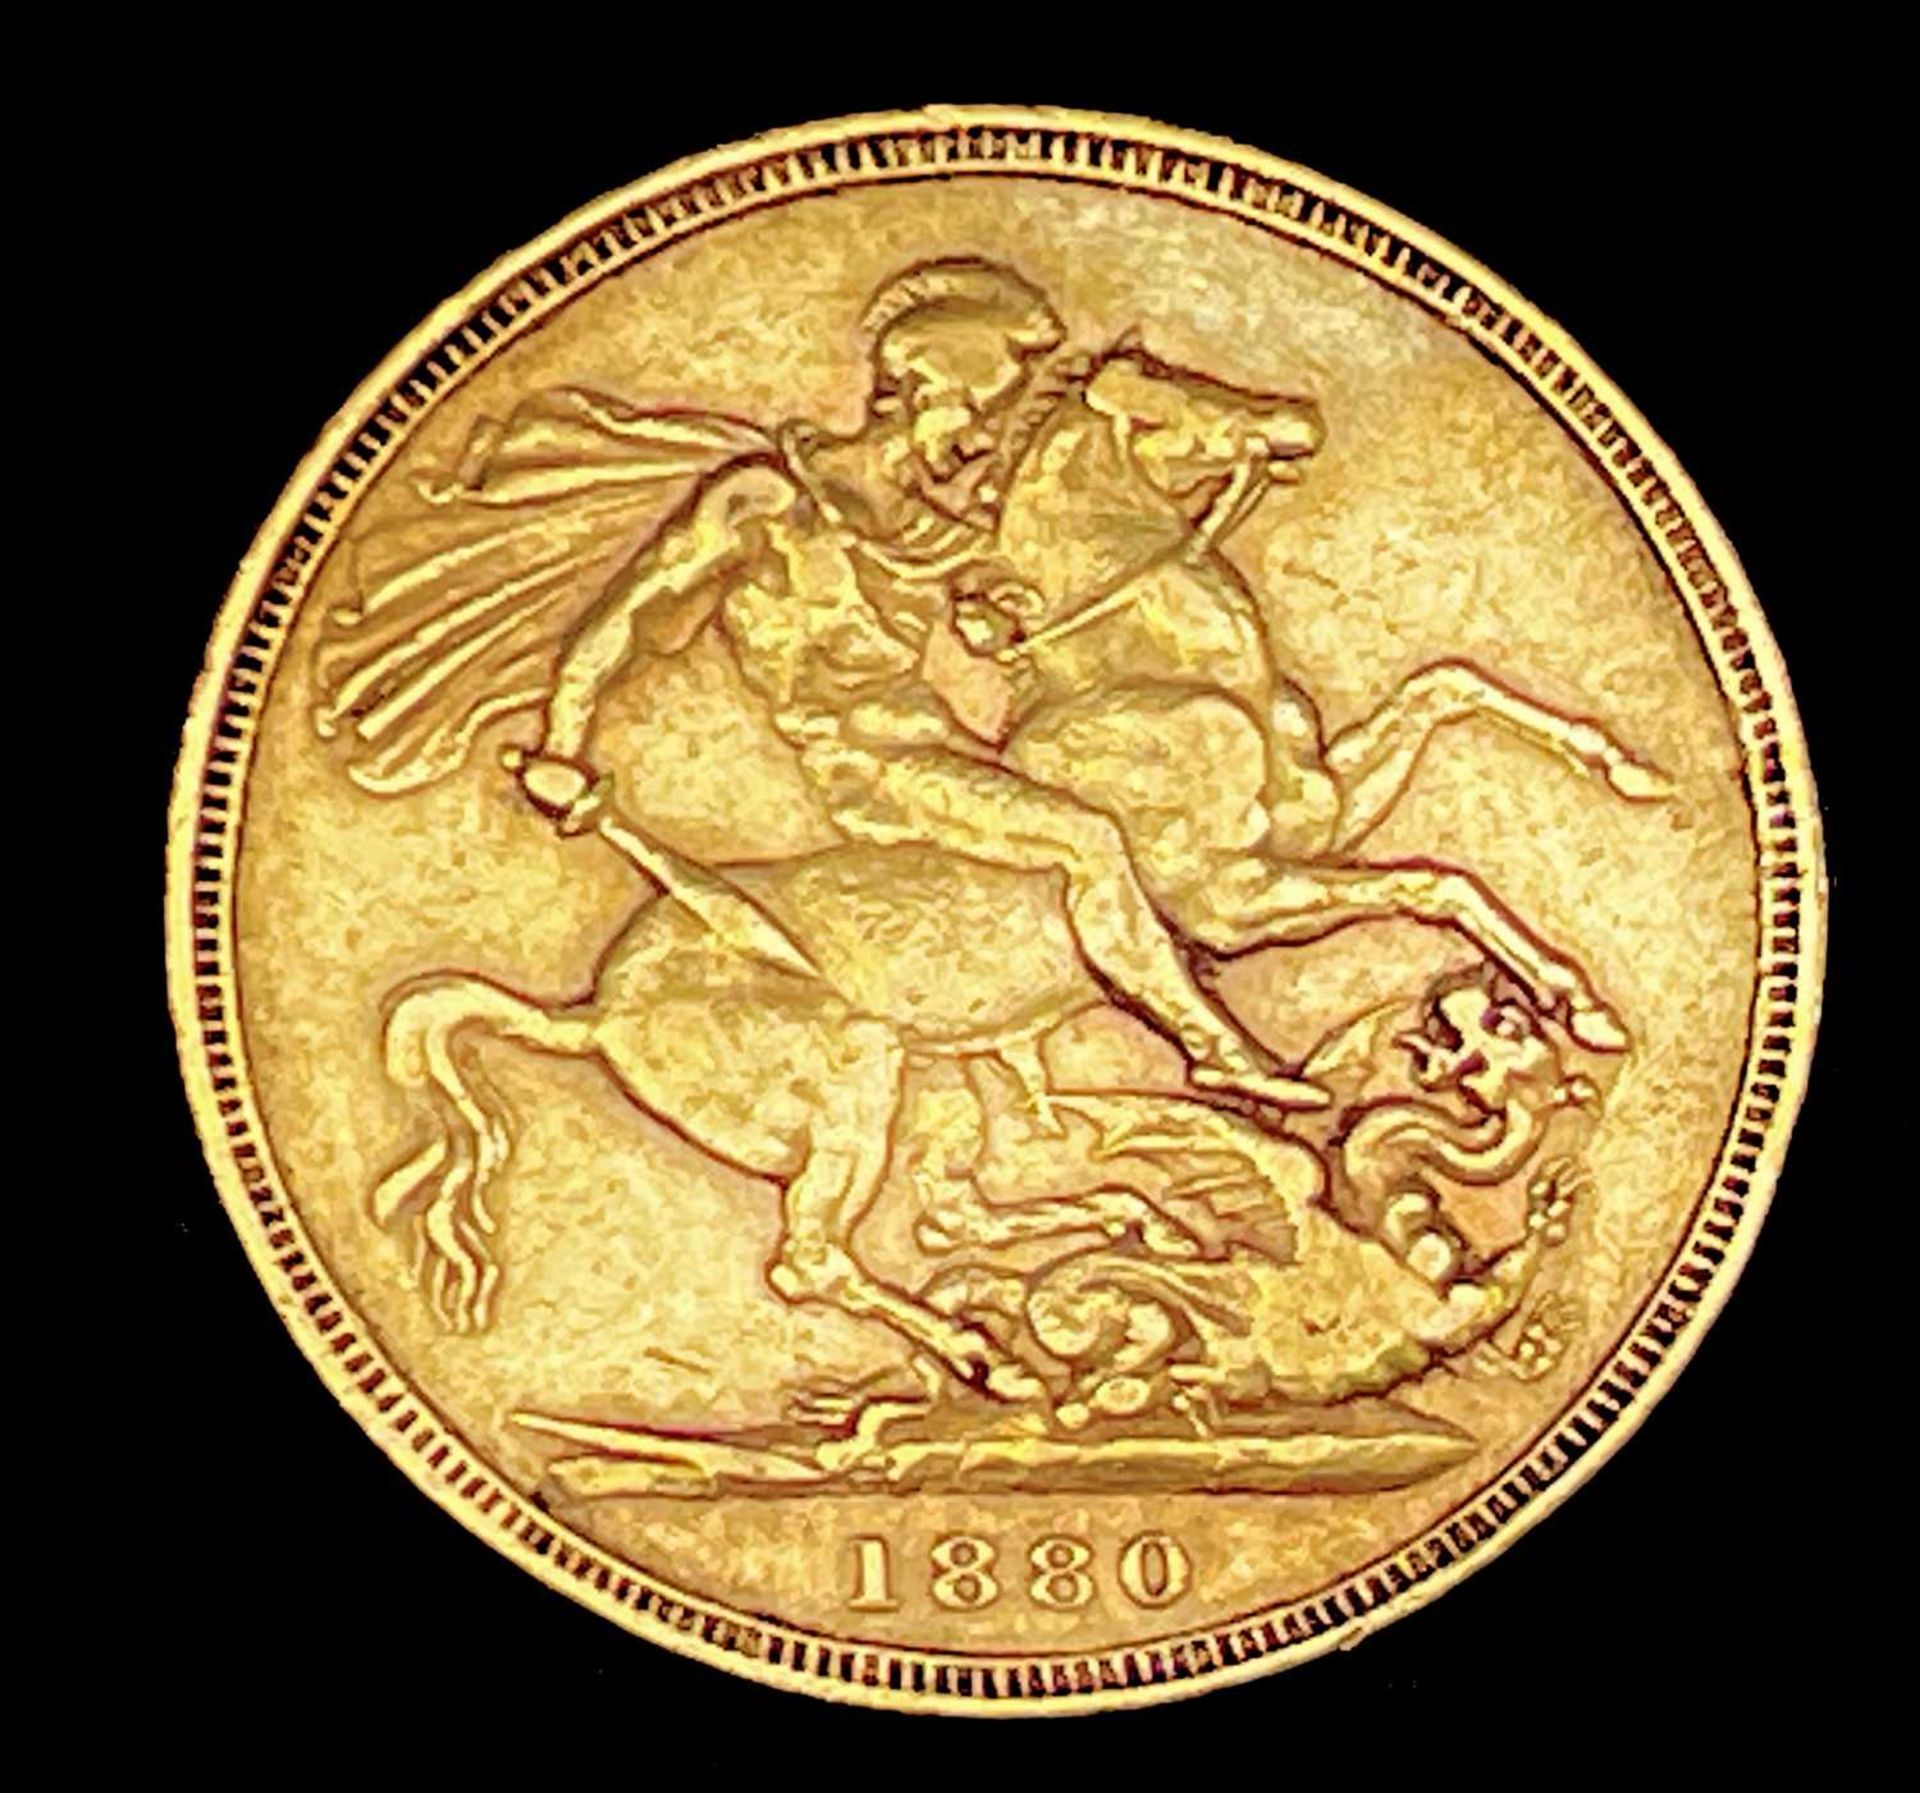 Great Britain Gold Sovereign 1880 George & Dragon Additional Information: Melbourne mint mark is